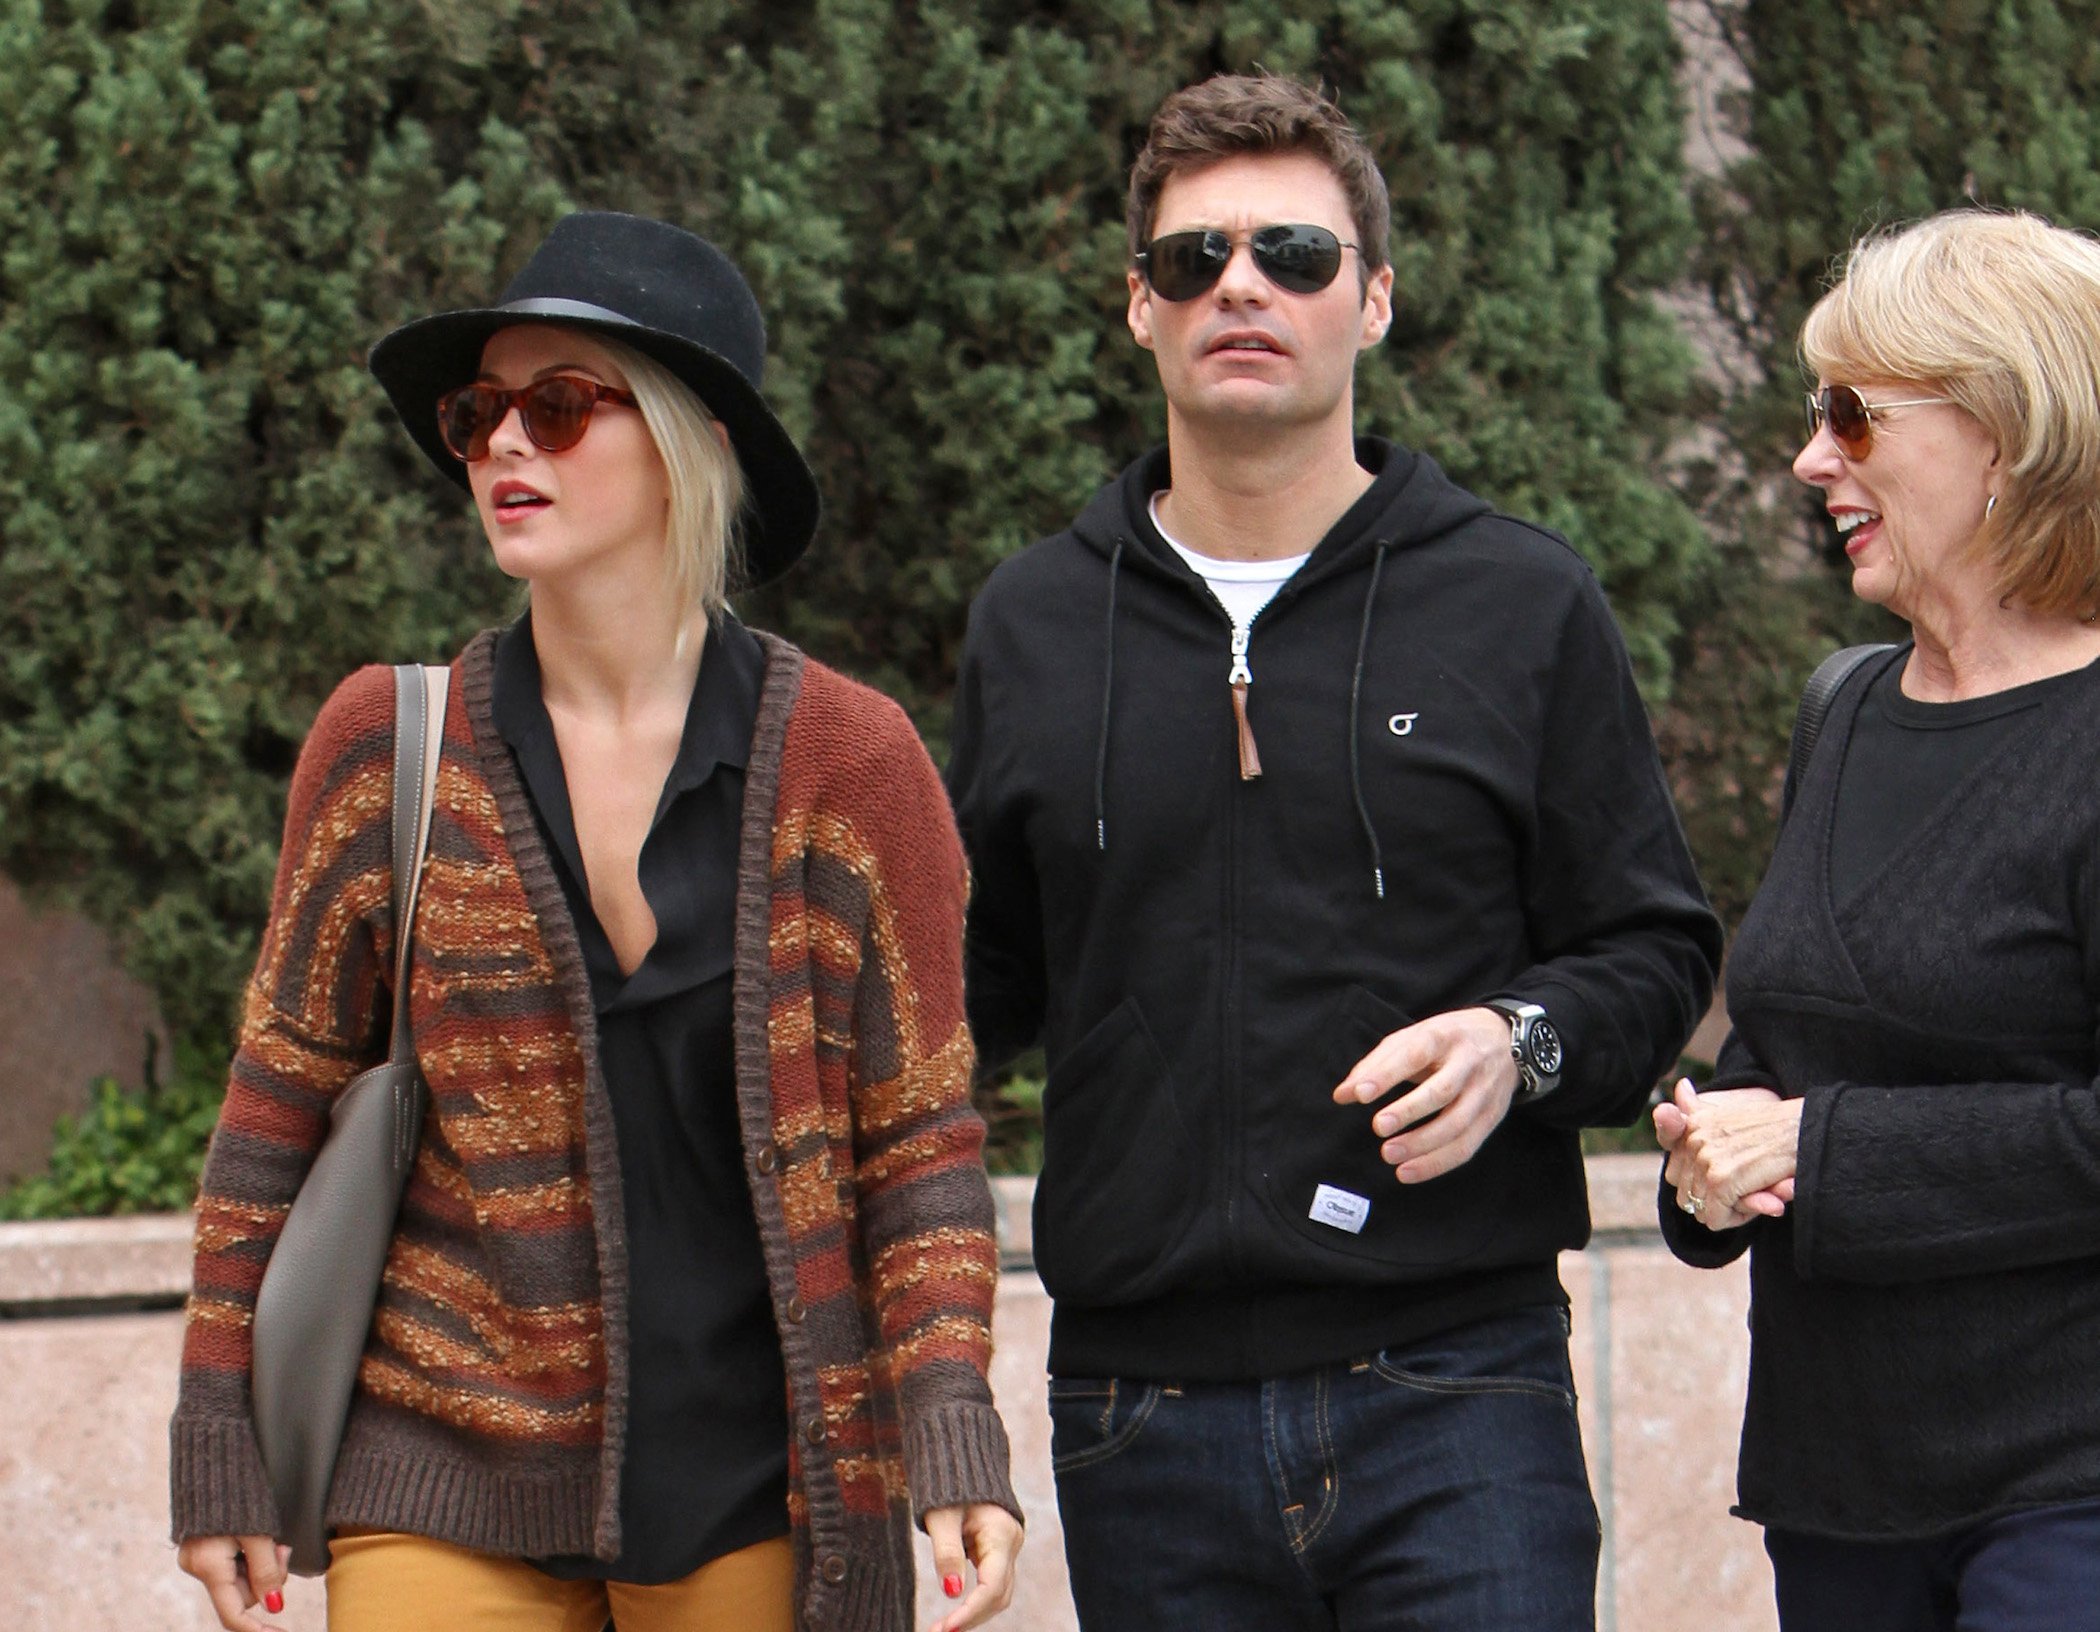 Ryan Seacrest and Julianne Hough are seen on Dec. 23, 2012